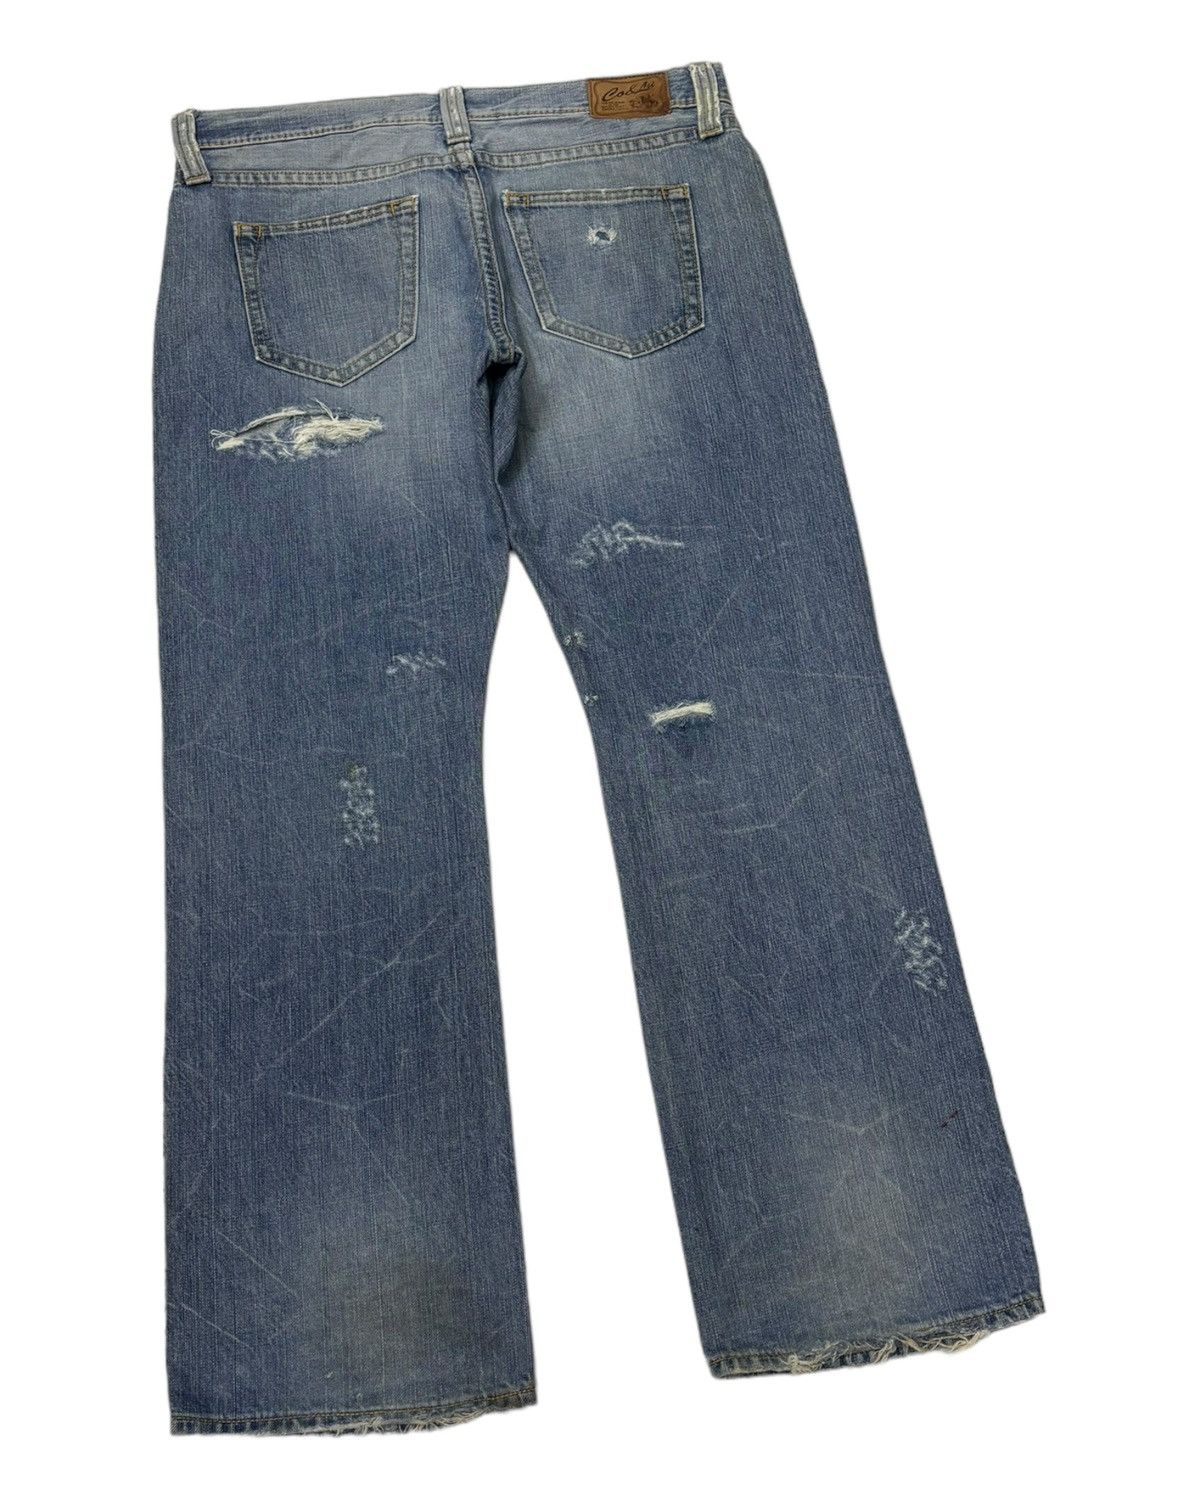 Archival Clothing - VINTAGE CO&LU THRASHED DISTRESS RIPS BAGGY FLARE JEANS - 6